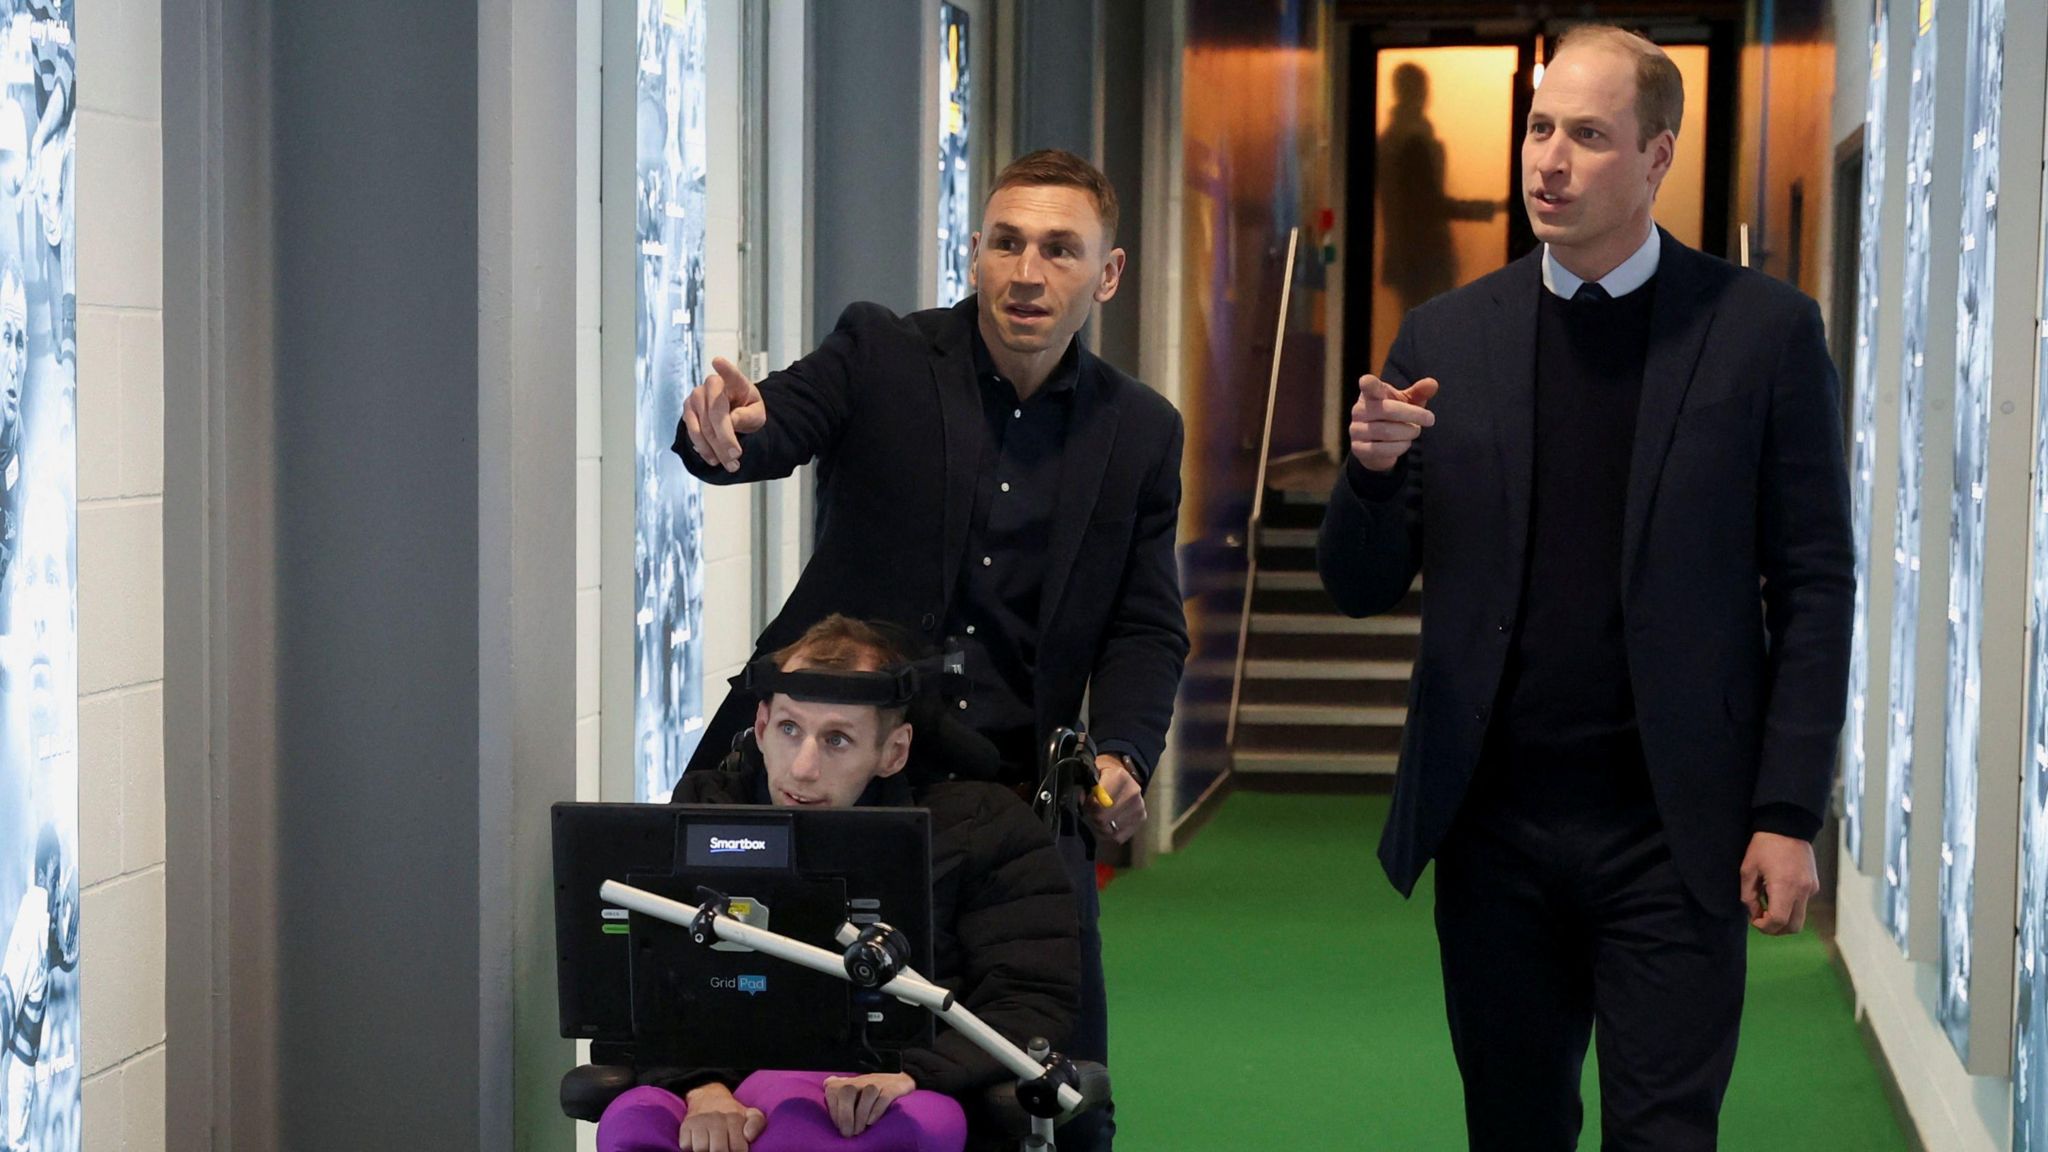 The Prince of Wales (right) meeting Rob Burrow and Kevin Sinfield during a visit to Headingley Stadium, Leeds, to congratulate them and award them a Commander of the Order of the British Empire (CBE), for their efforts to raise awareness of Motor Neurone Disease